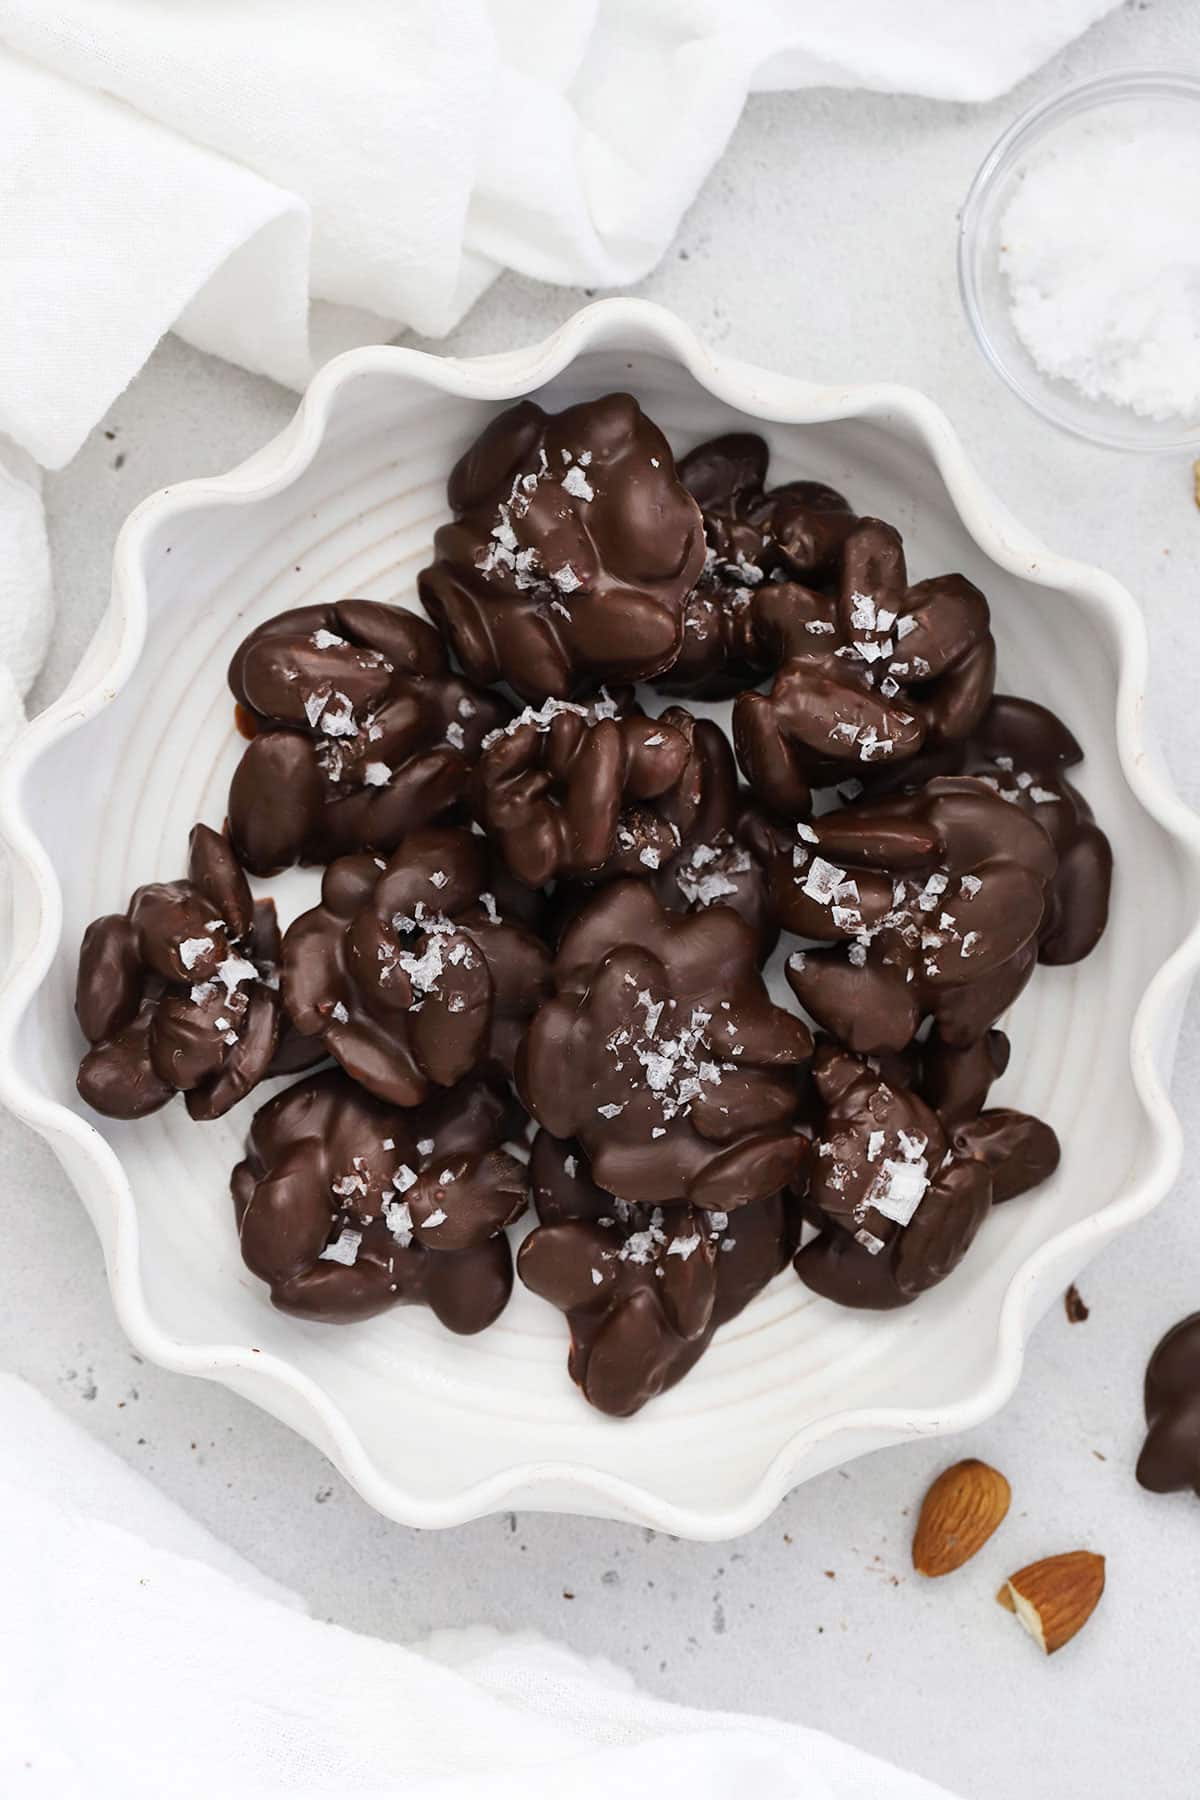 Dark chocolate almond clusters with flaky salt on a white ruffled plate